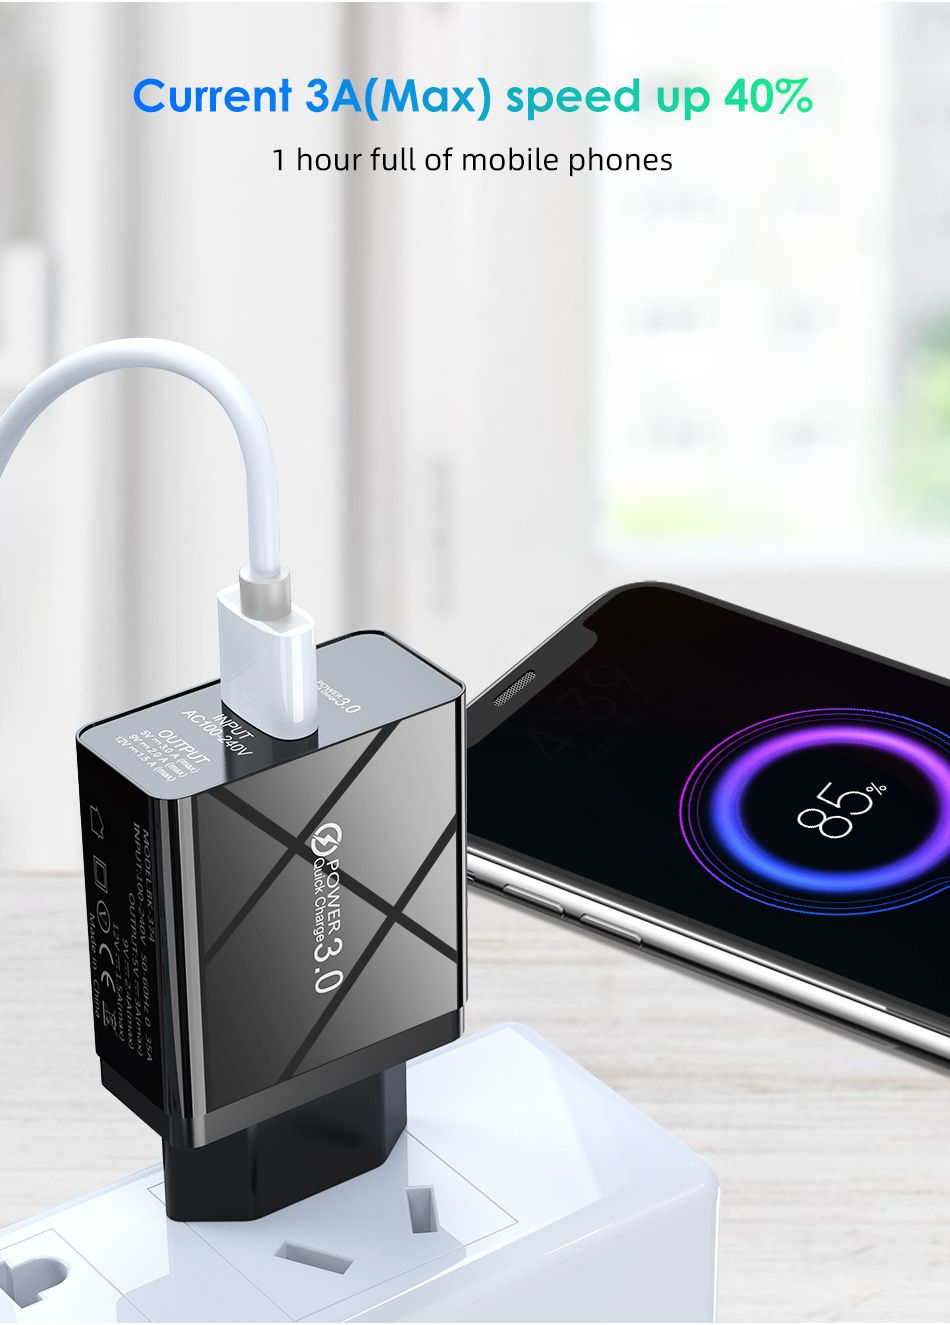 Bakeey-3A-USB-Charger-QC30-Quick-Charging-For-iPhone-XS-11Pro-Xiaomi-Mi10-Redmi-Note-9S-1686400